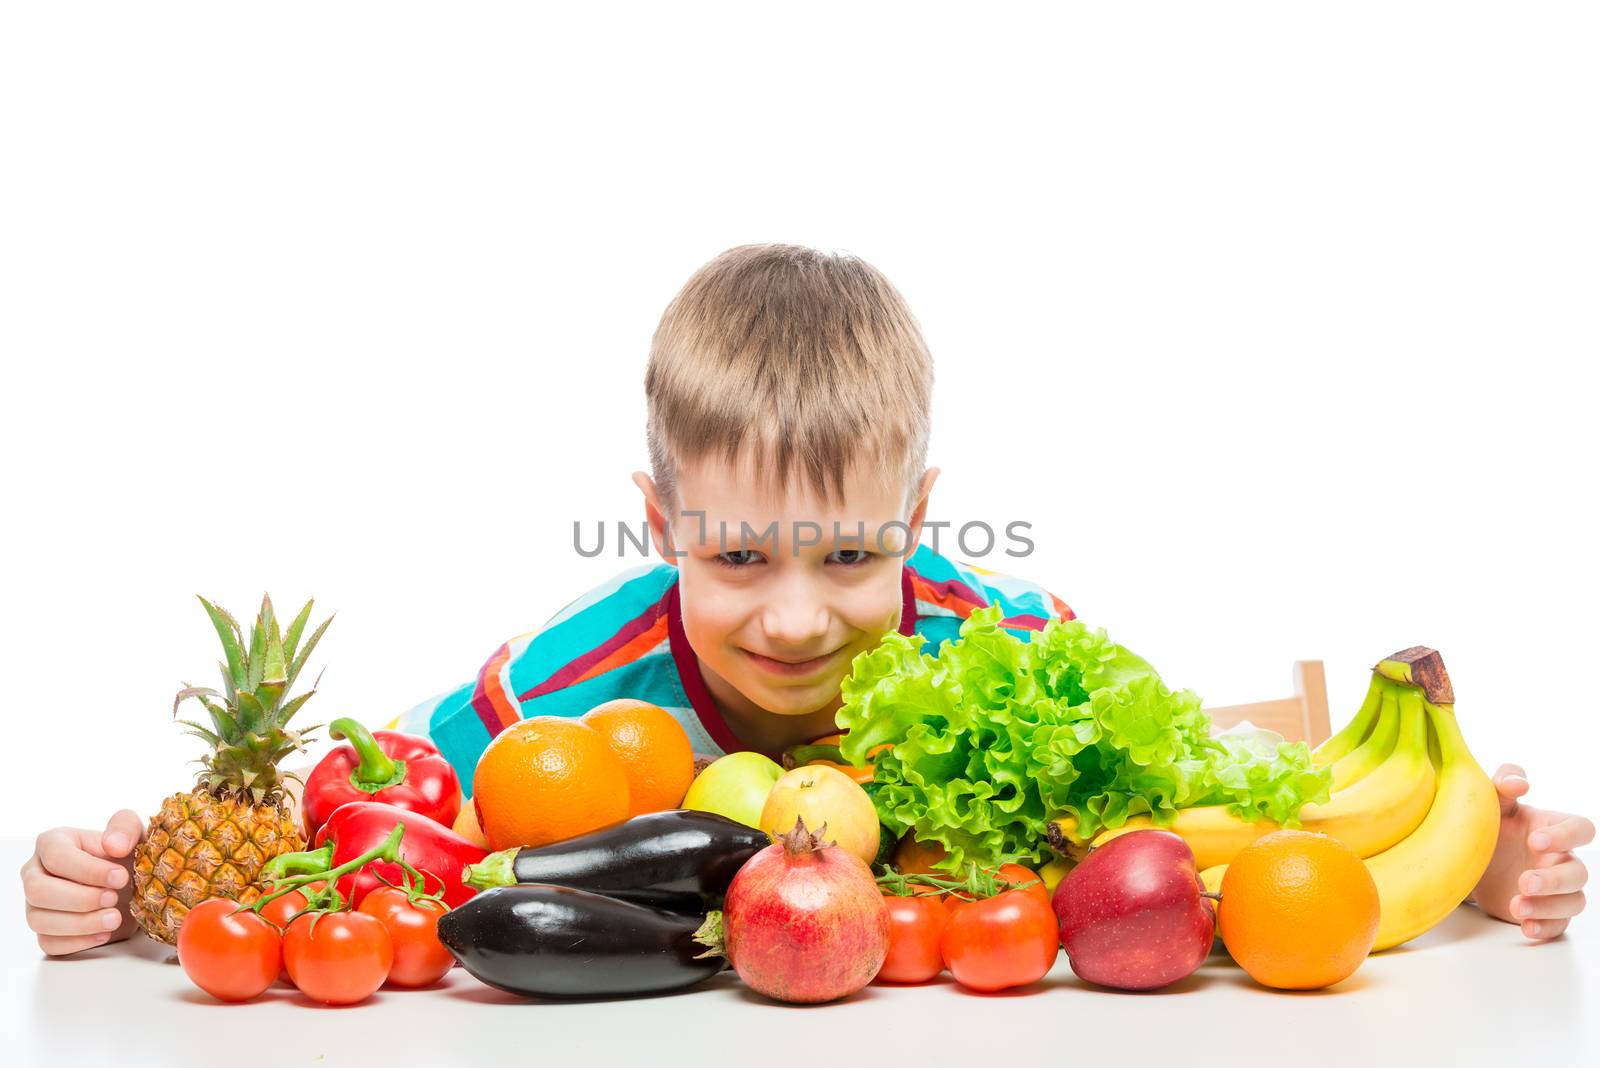 Smiling healthy boy with a bunch of juicy ripe vegetables and fruits on a white background